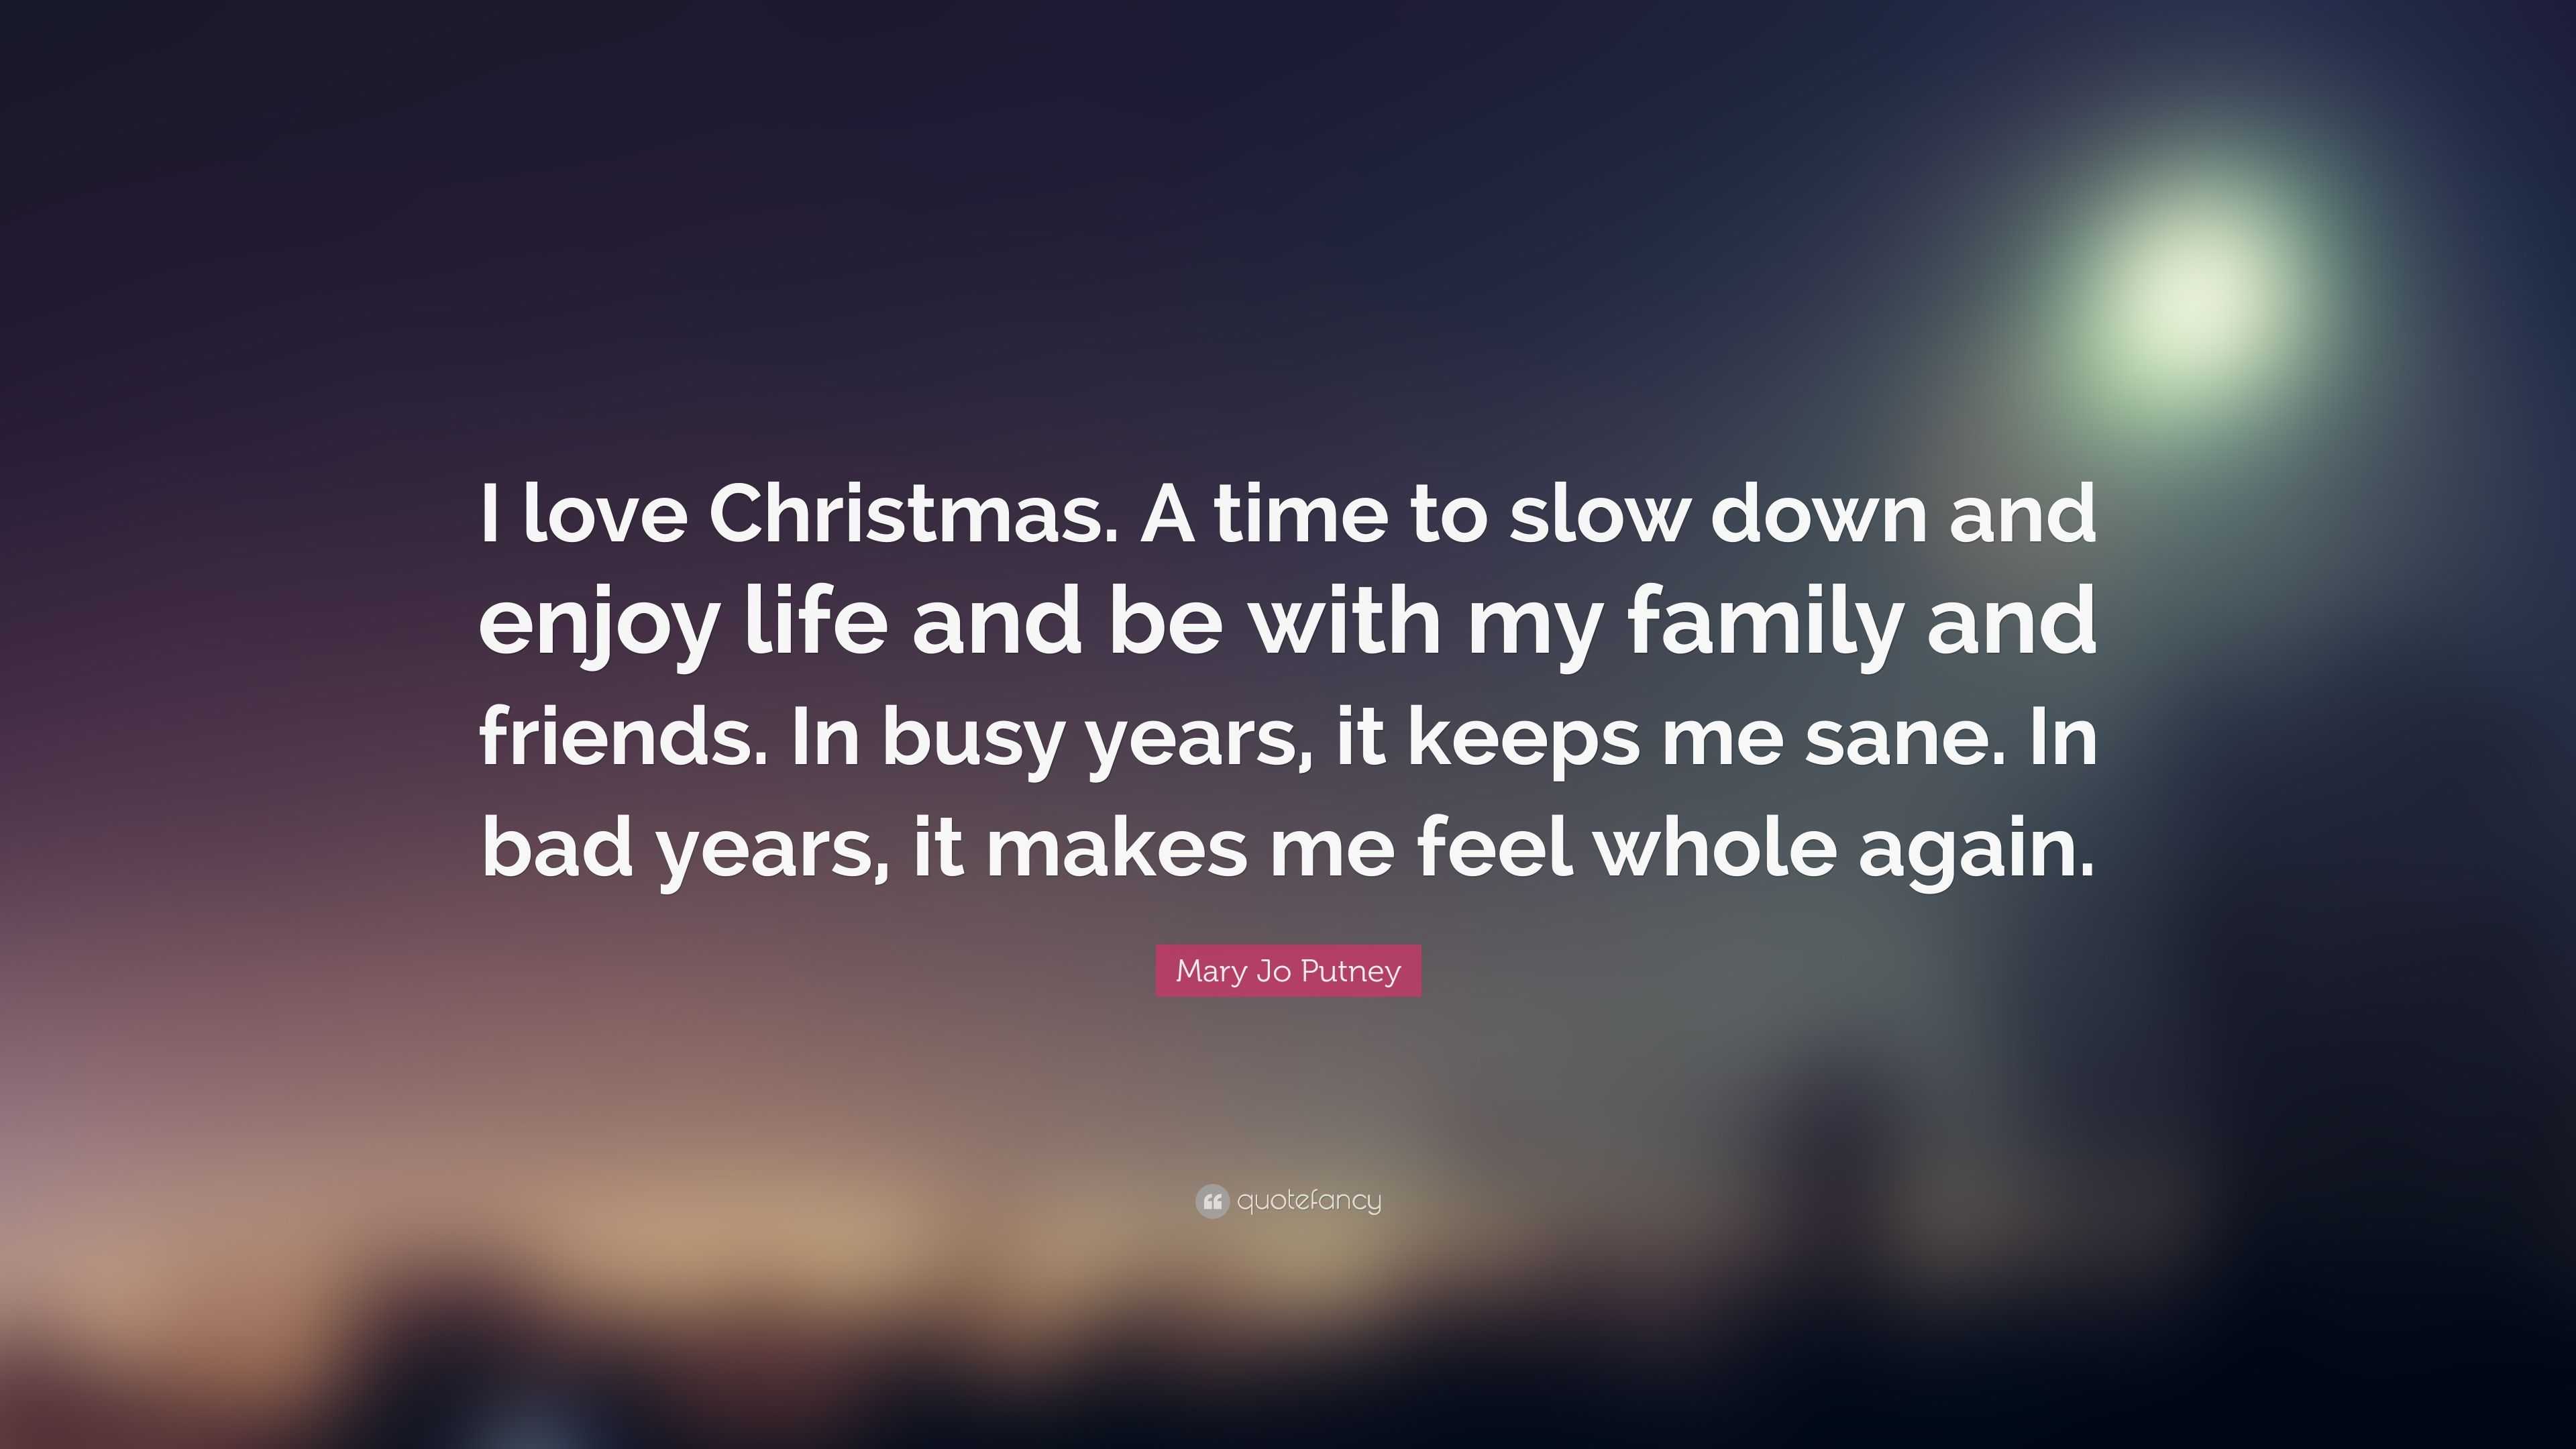 Mary Jo Putney Quote “I love Christmas A time to slow down and